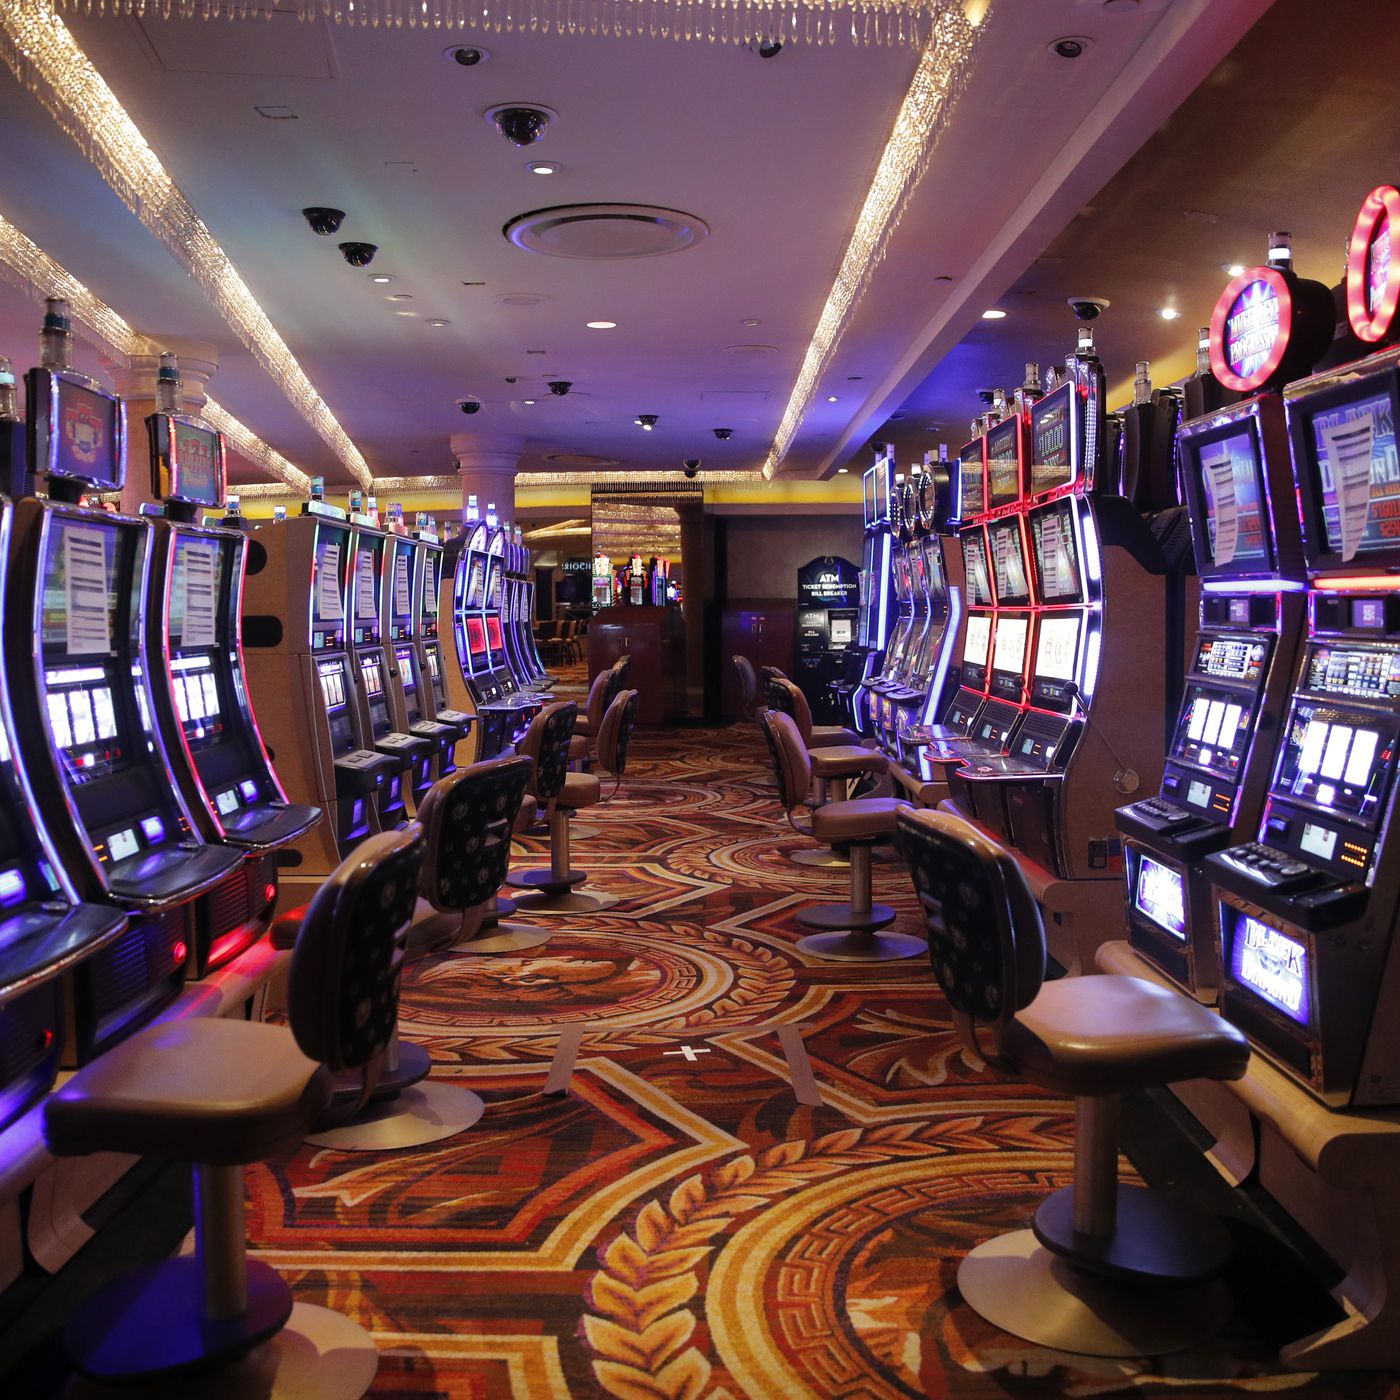 Las Vegas casinos set to reopen June 4 with disinfected dice, no buffets -  Chicago Sun-Times